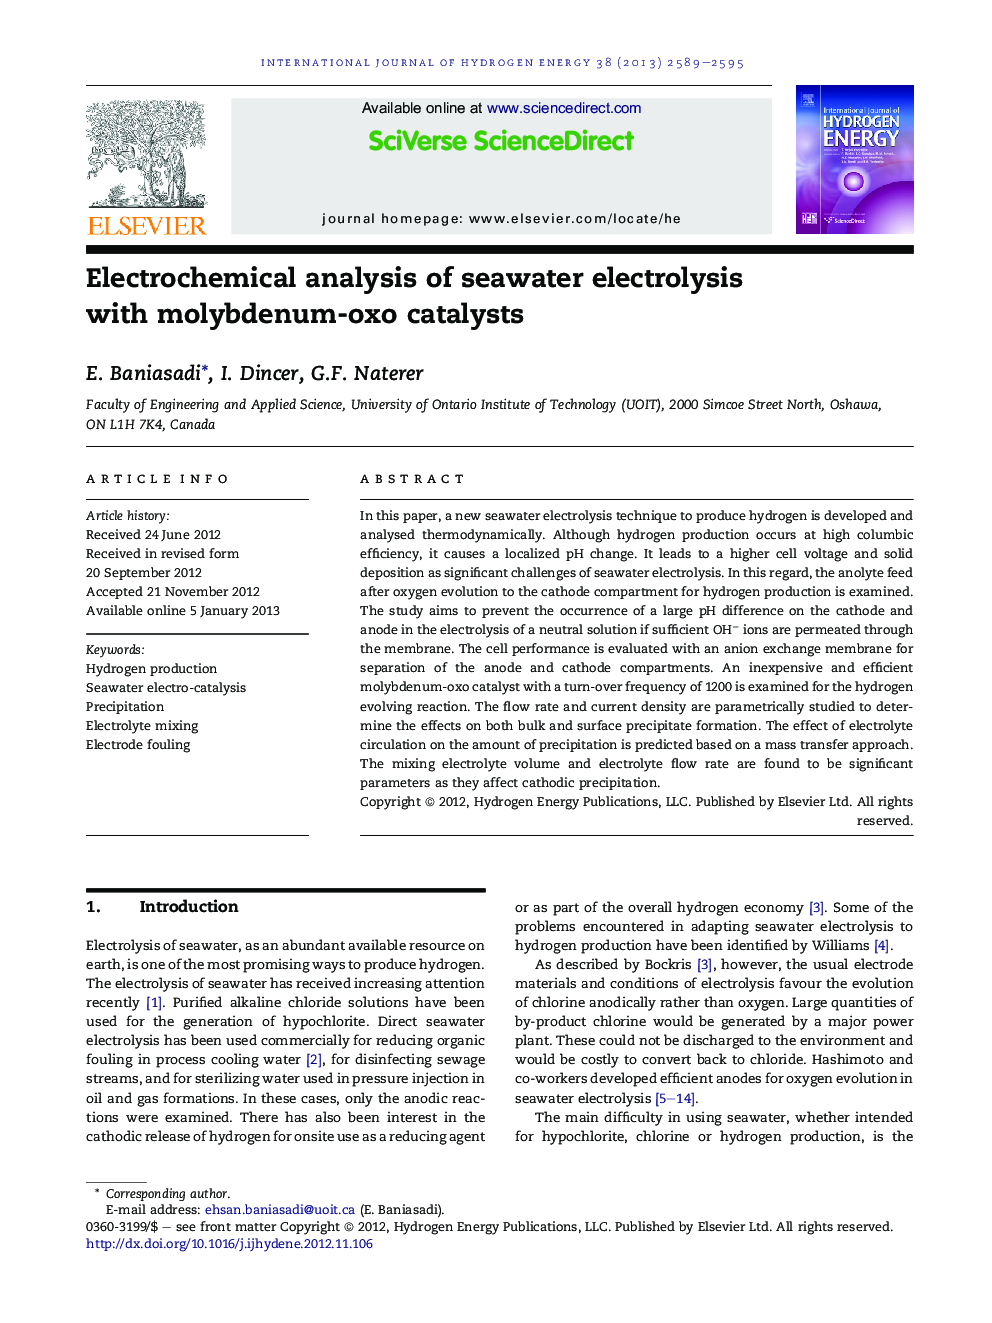 Electrochemical analysis of seawater electrolysis with molybdenum-oxo catalysts